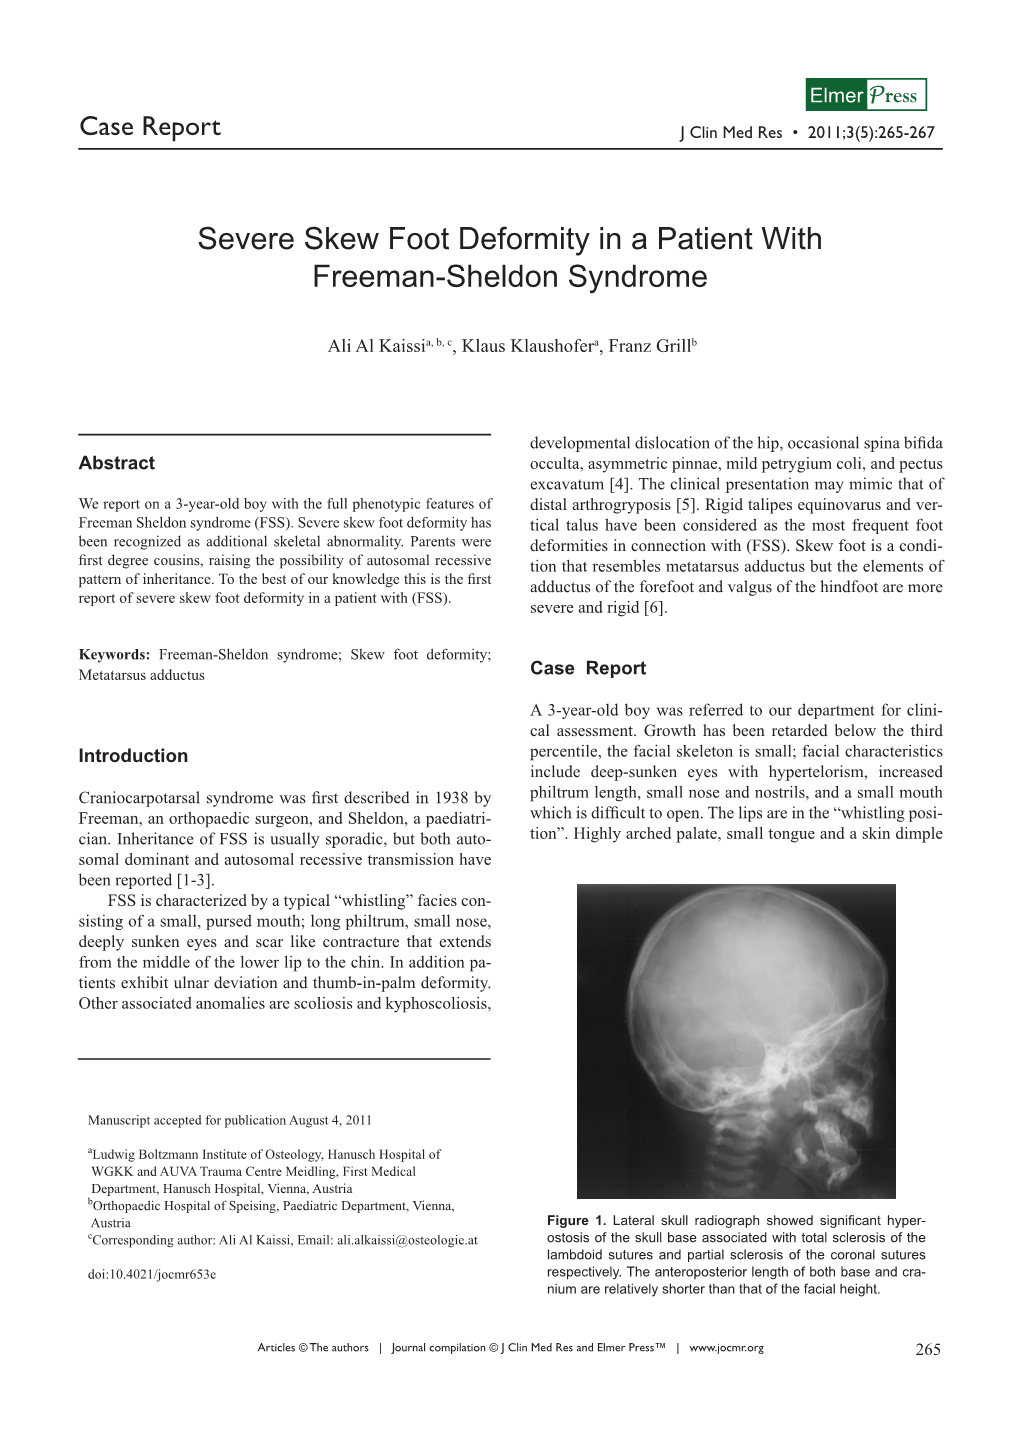 Severe Skew Foot Deformity in a Patient with Freeman-Sheldon Syndrome